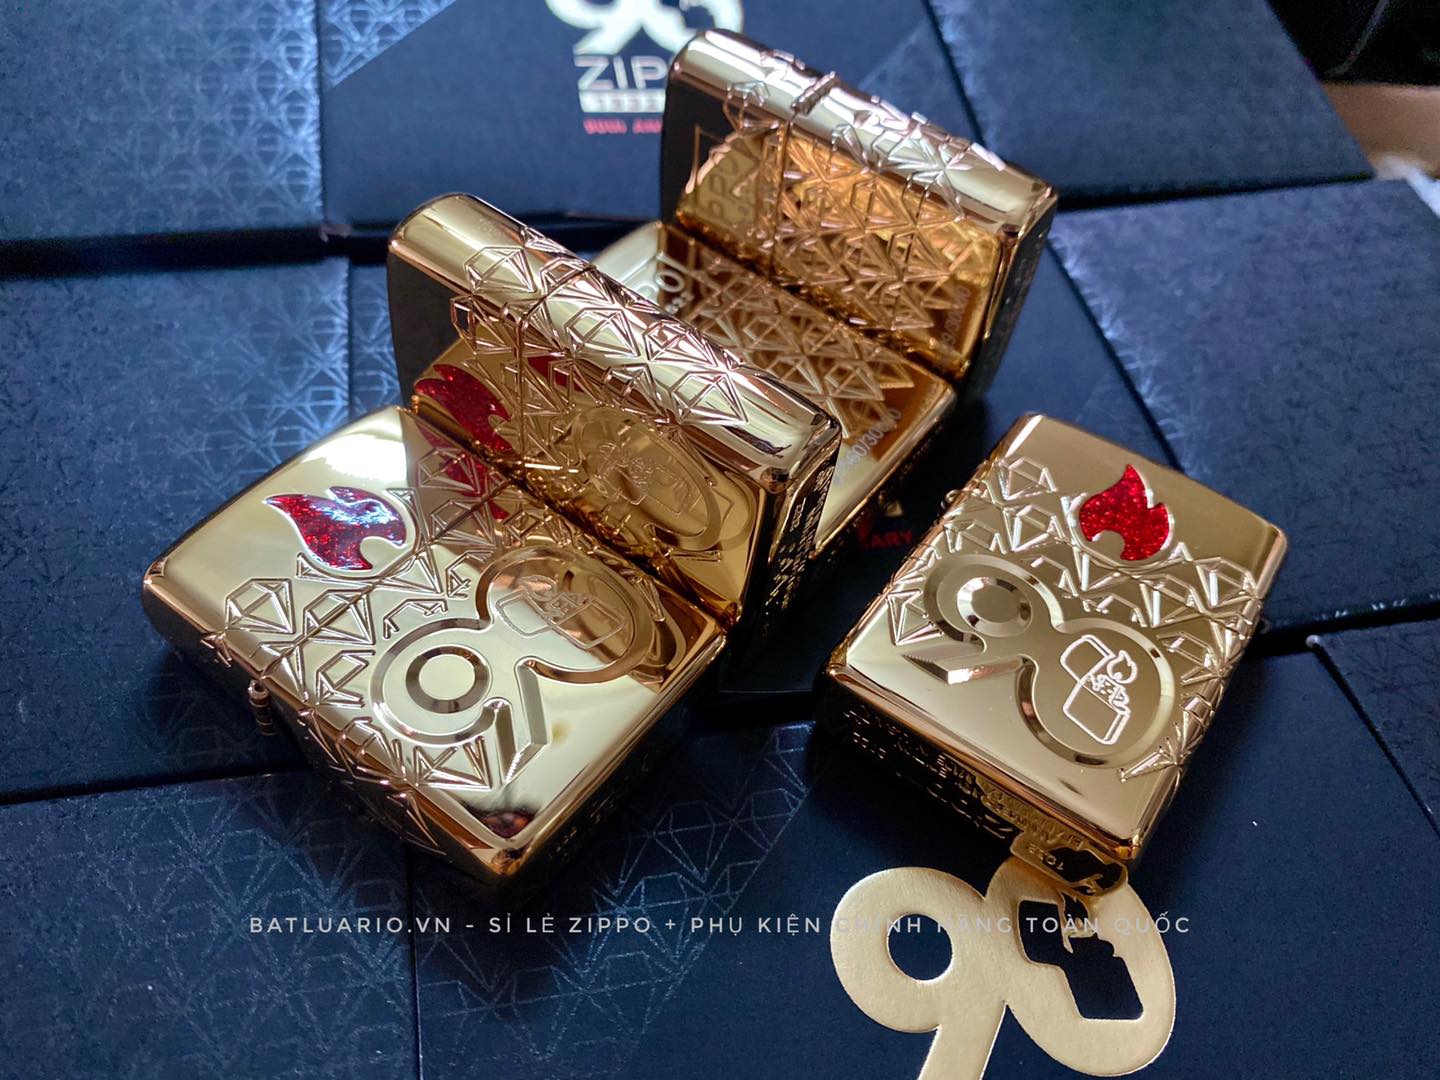 Zippo 49866 – Zippo 90th Anniversary Limited Edition - Zippo 2022 Collectible Of The Year Asia - Gold Plated - Zippo Coty 2022 Asia 37